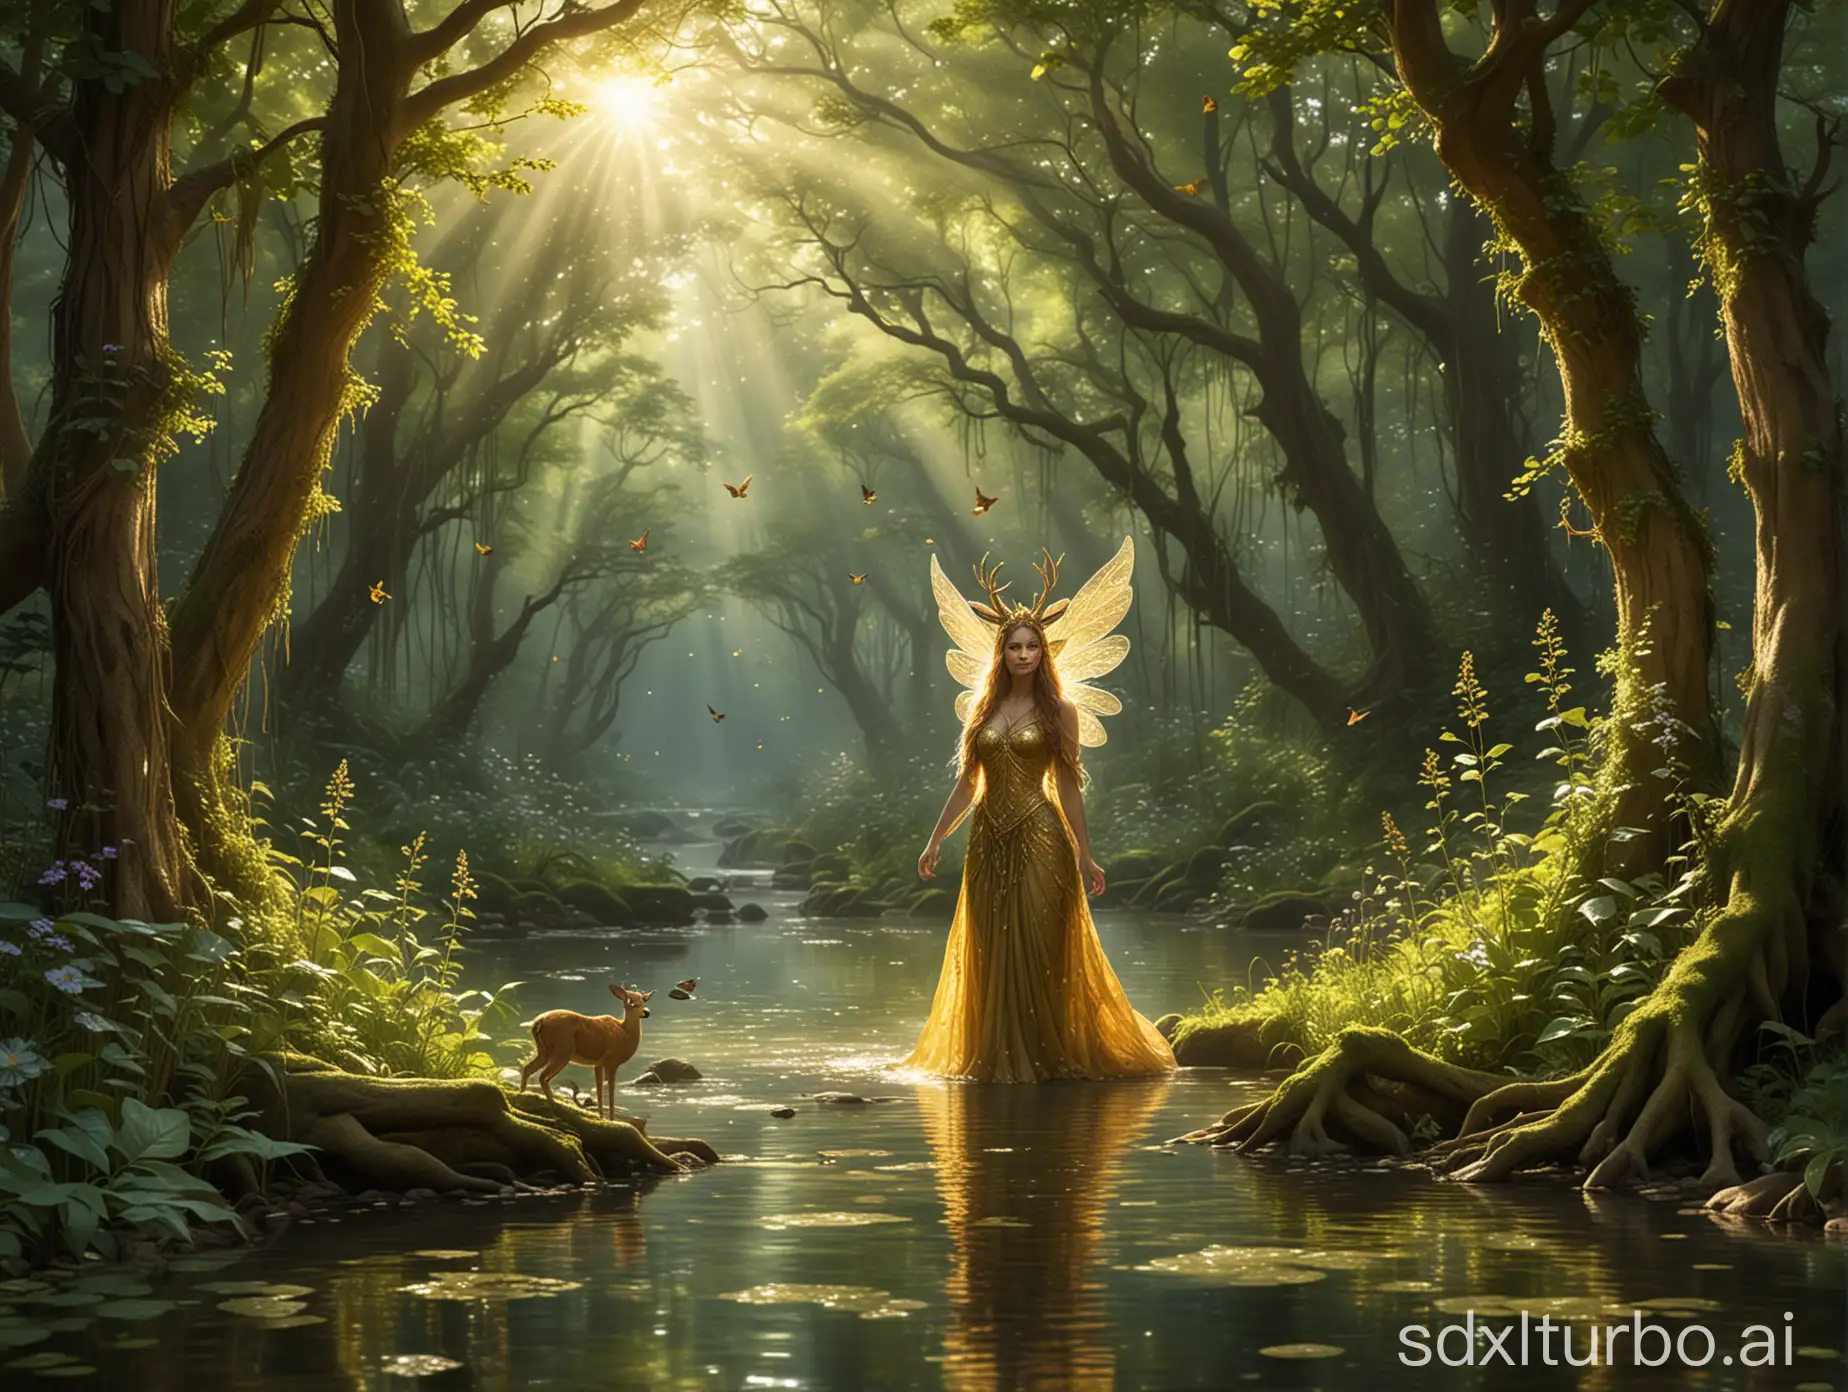 Depict a forest spirit living a tranquil life in the verdant and mystical ancient forest. Sunlight filters through the towering canopy, casting golden dappled shadows. The spirit has pointed ears and iridescent transparent wings, dressed in natural attire woven from leaves and vines, adorned with seasonal wildflowers. She dances gracefully beneath the ancient trees, surrounded by a babbling brook and a rich array of wildlife, such as deer and birds. The entire scene is enveloped in a soft magical aura, creating a dreamlike atmosphere of peace and harmony.